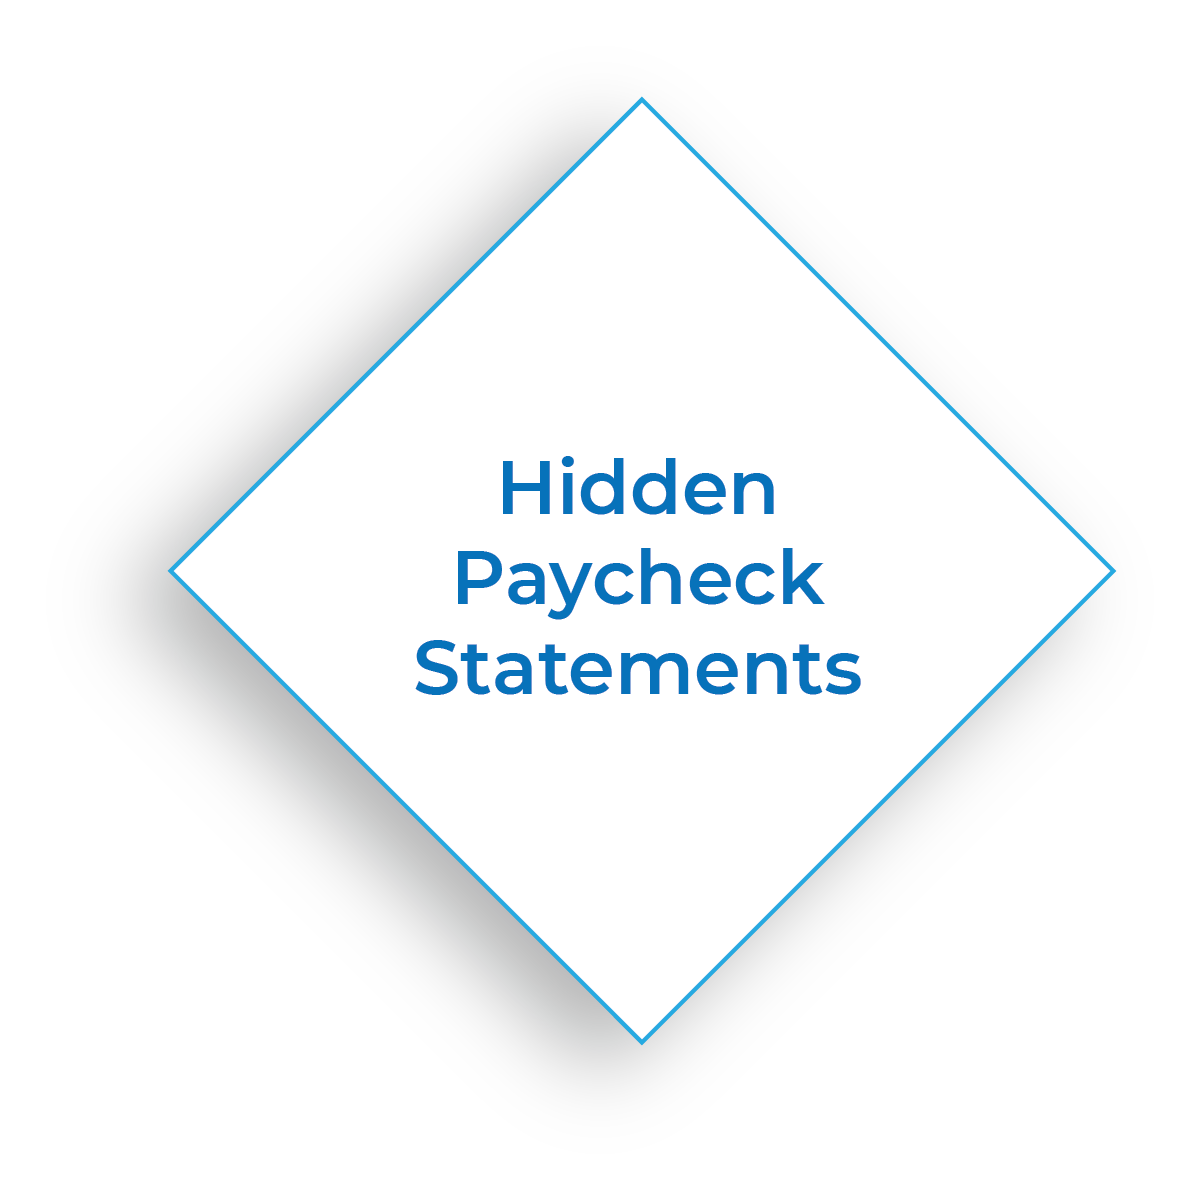 Hidden Paycheck Statements - Benefits - Bankers Cooperative Group